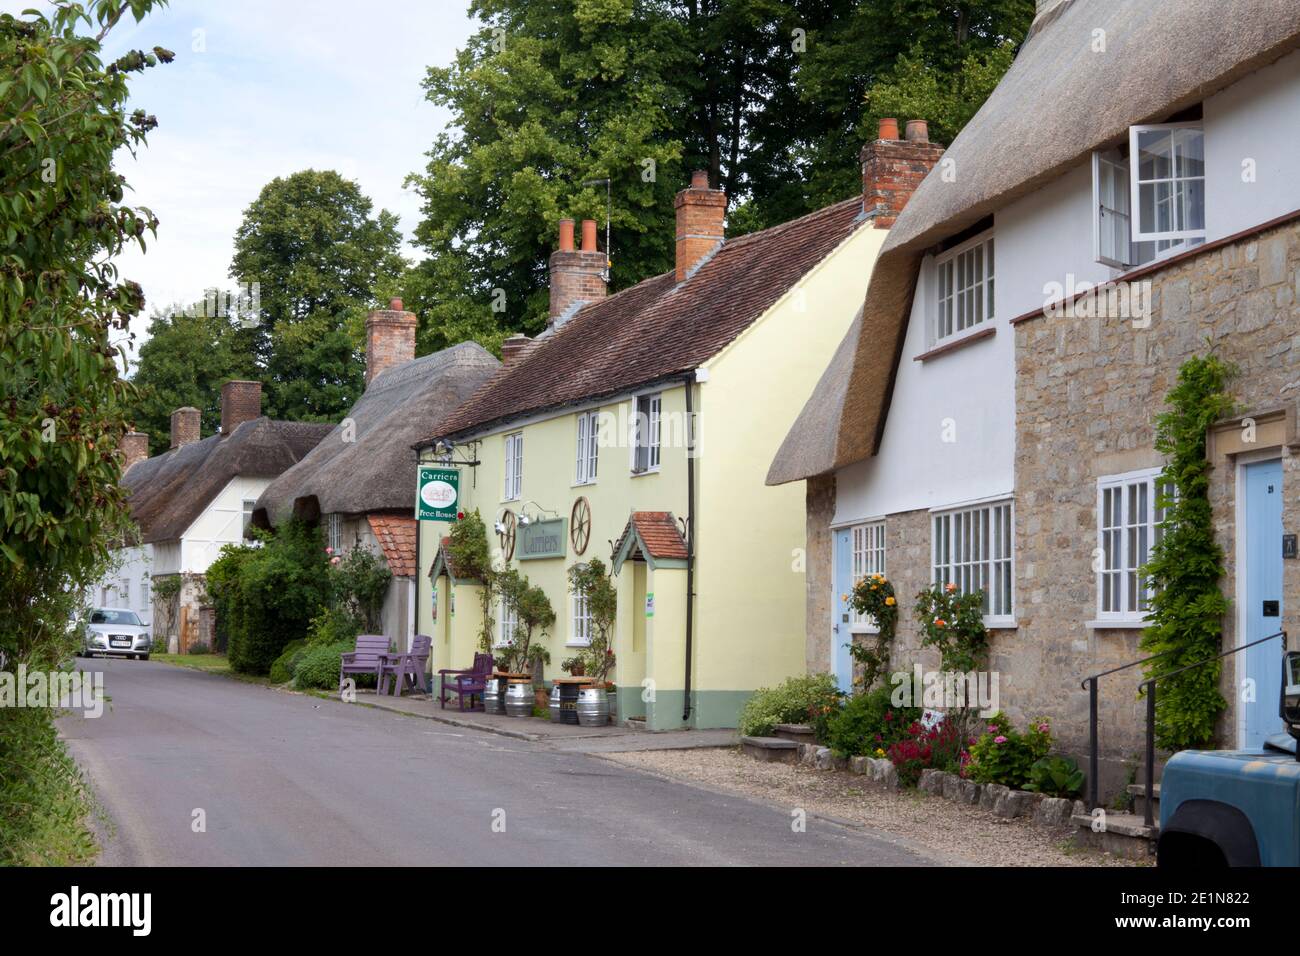 The main street in the village of Stockton, near Warminster in Wiltshire. Stock Photo